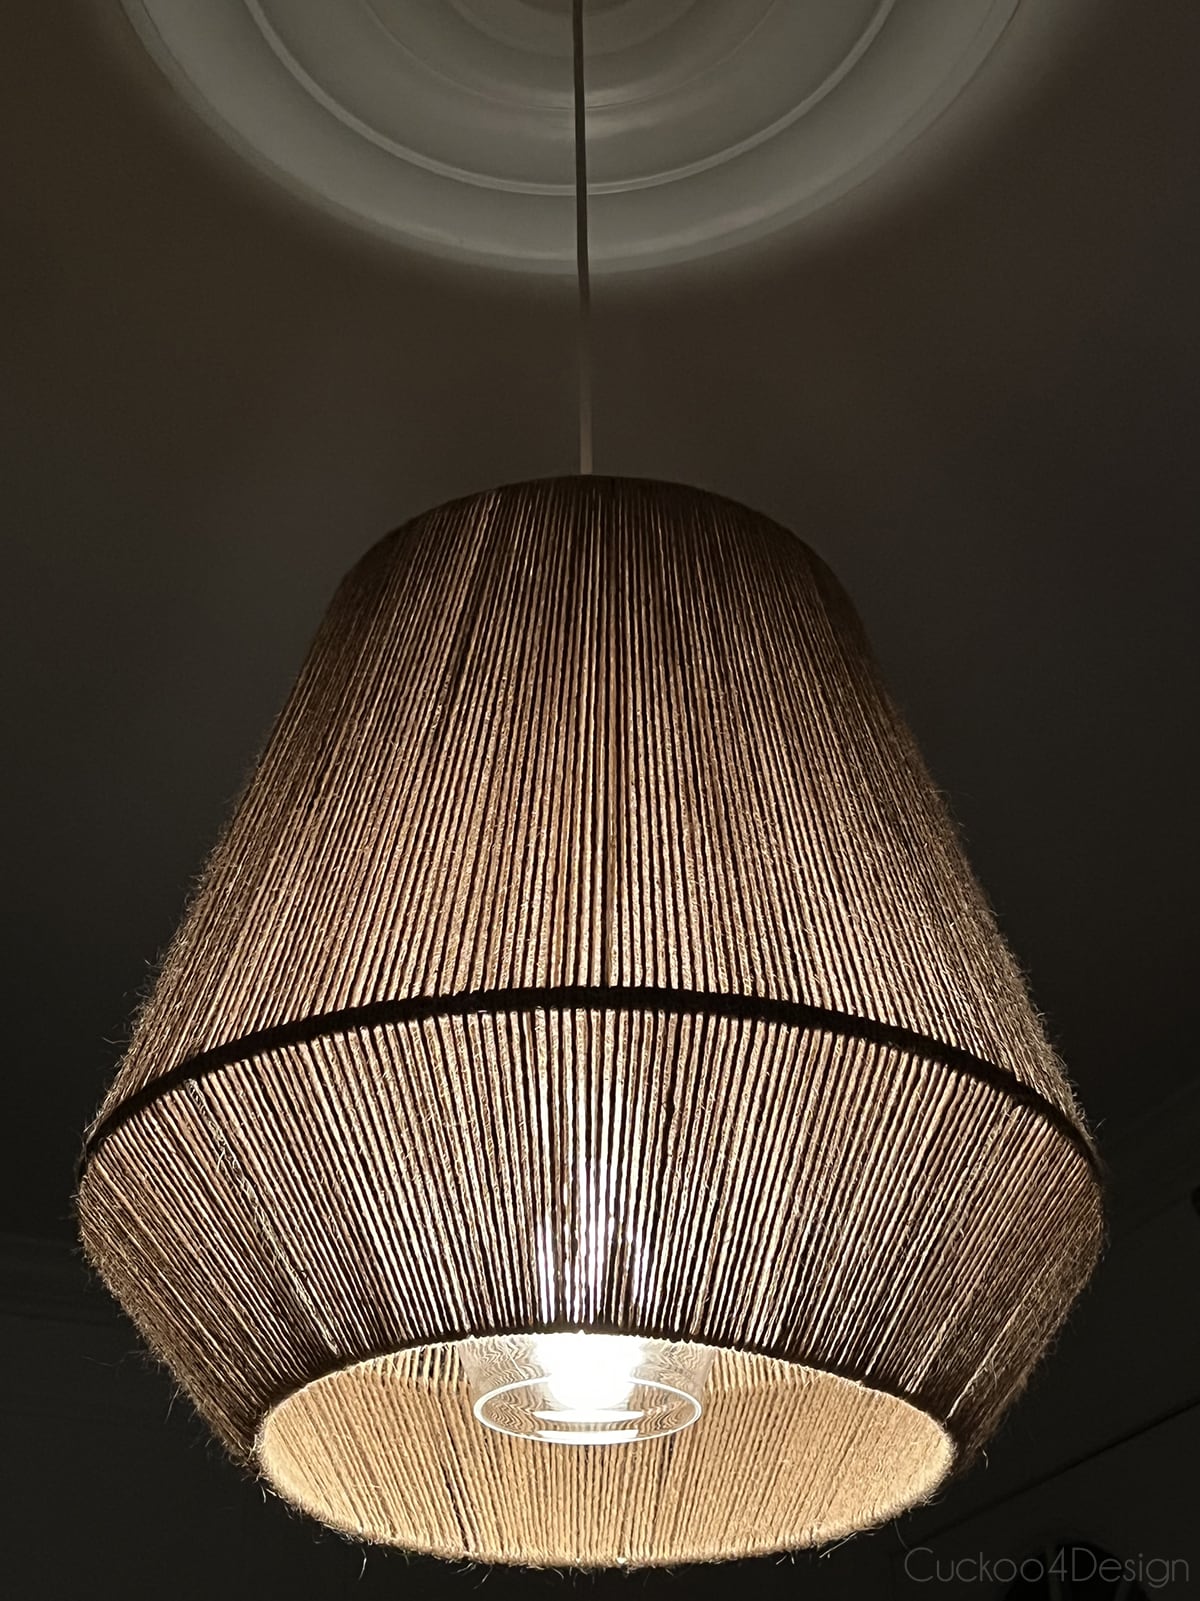 jute pendant light with lights on in complete darkness